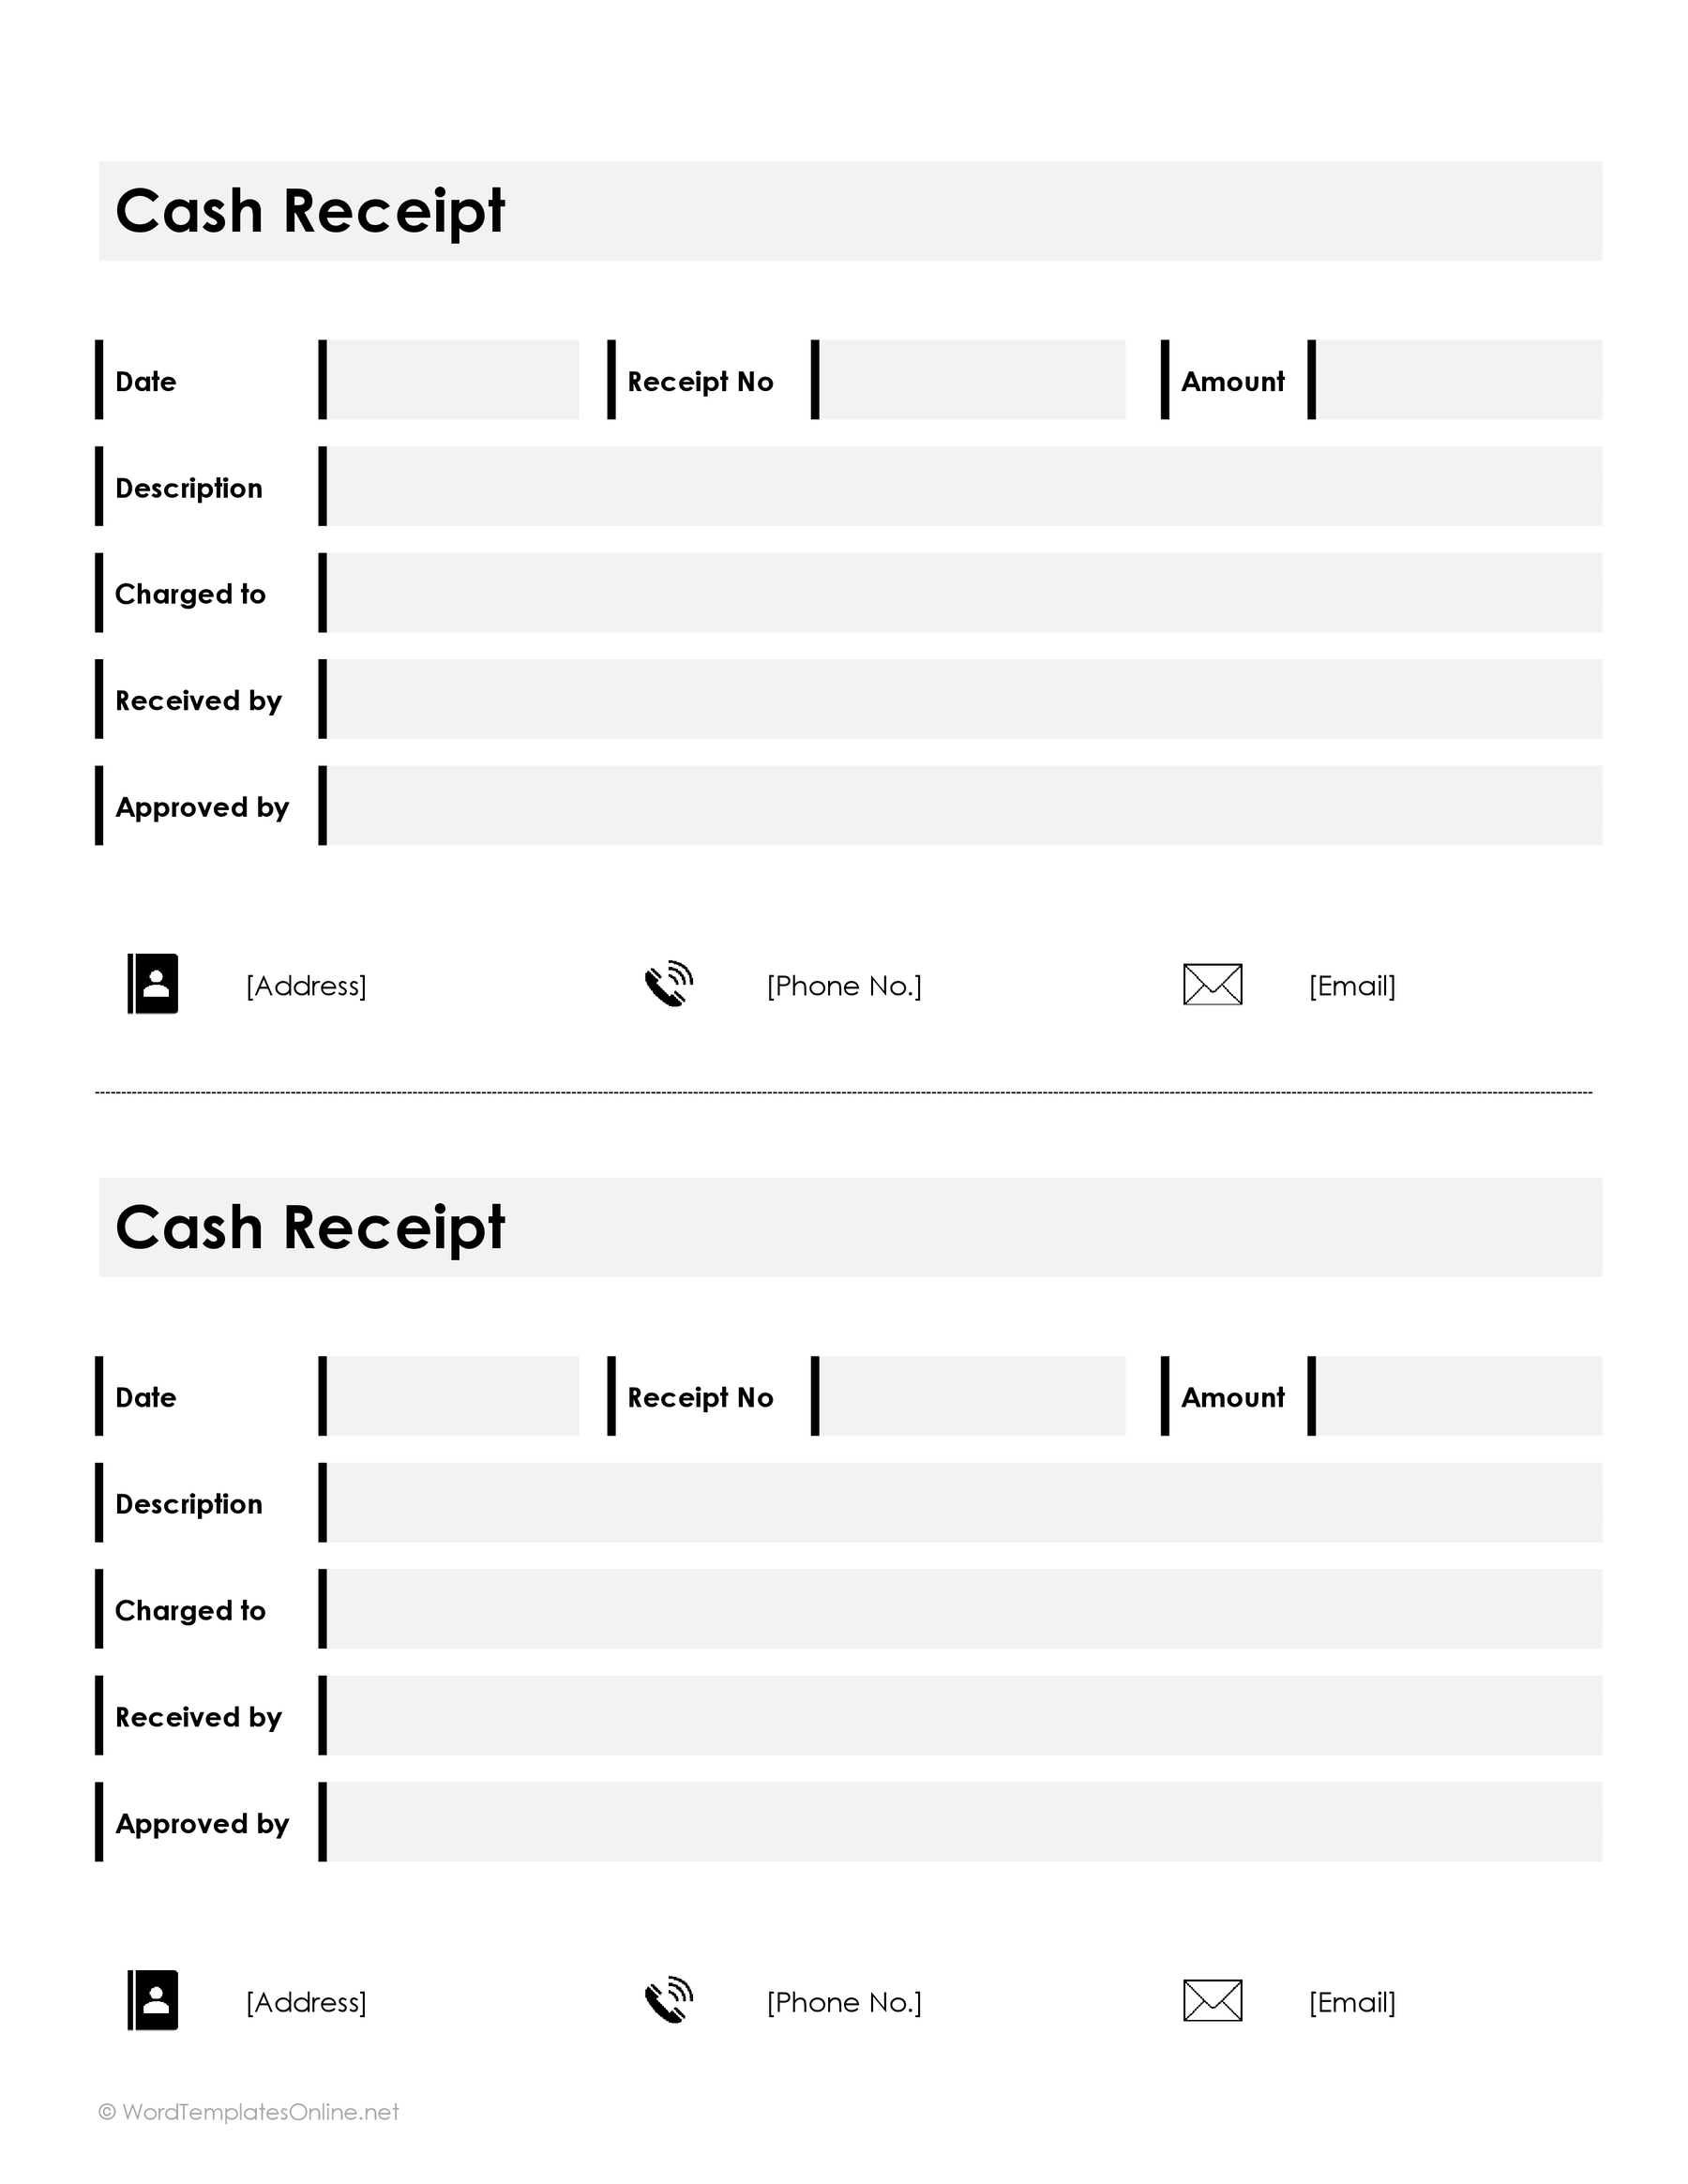 Customizable 2 in 1 Cash Receipt Template 11 for Word Document